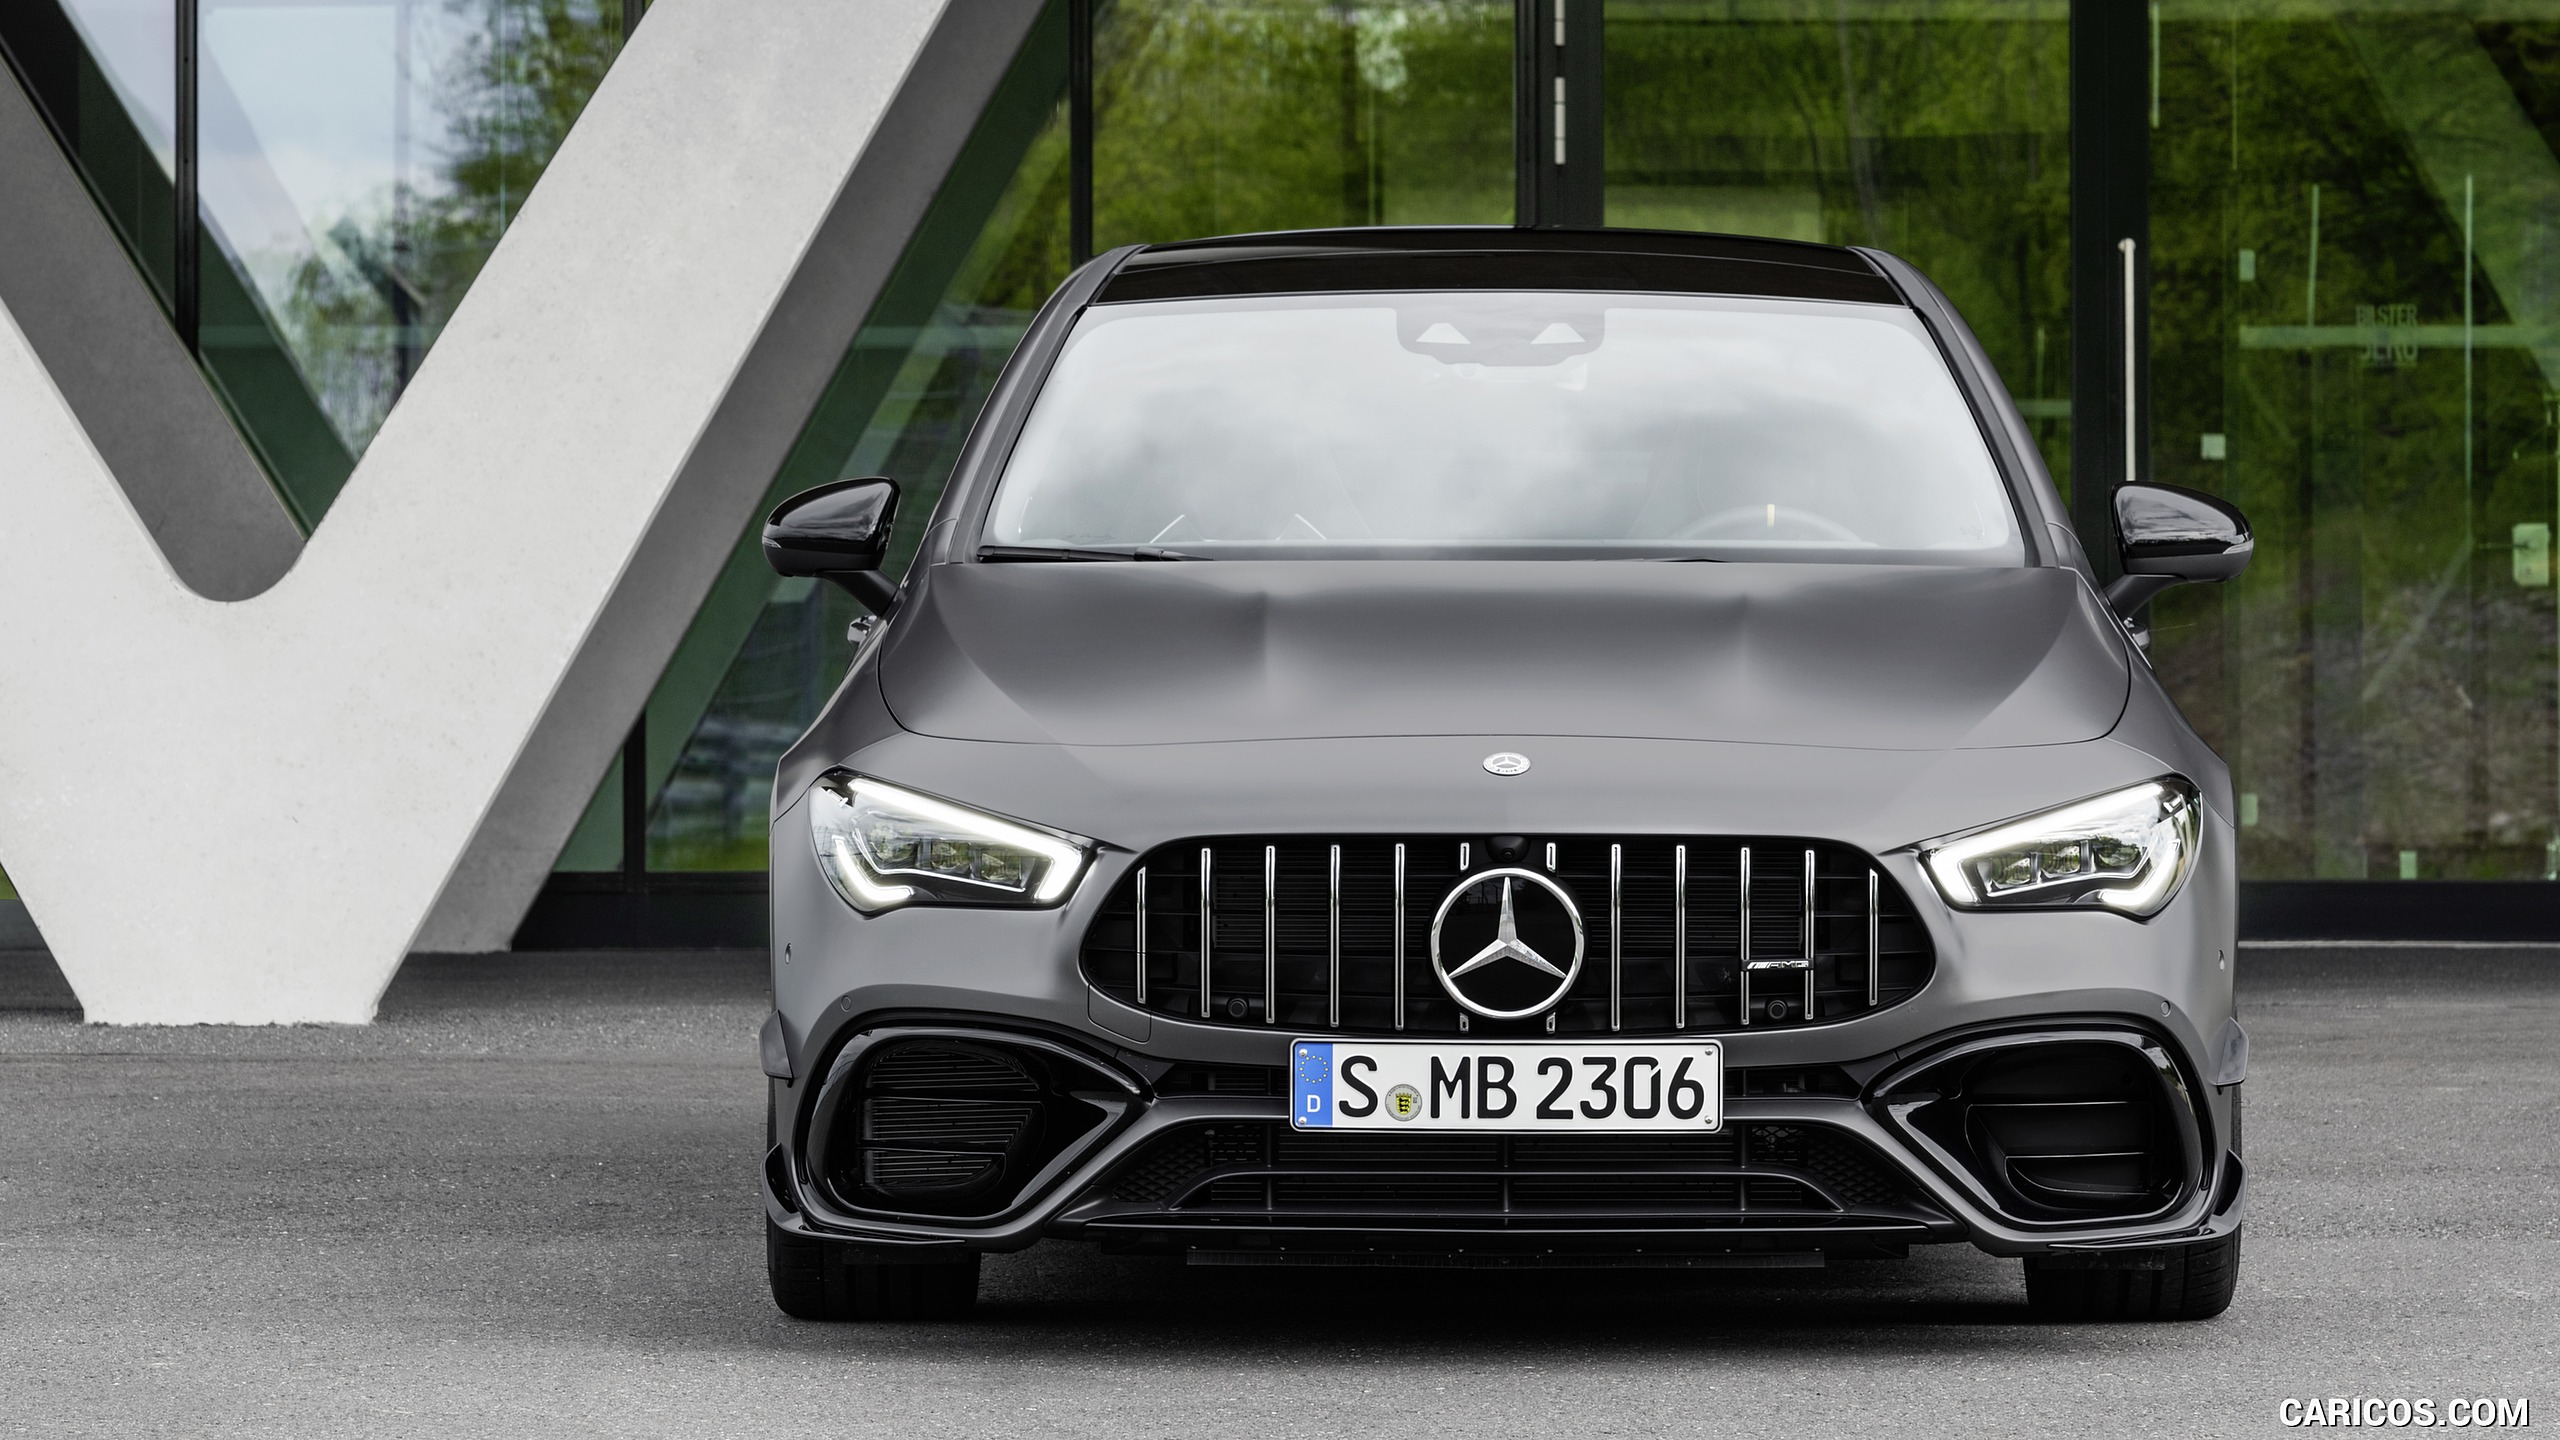 2020 Mercedes-AMG CLA 45 S 4MATIC+ - Front, #25 of 159